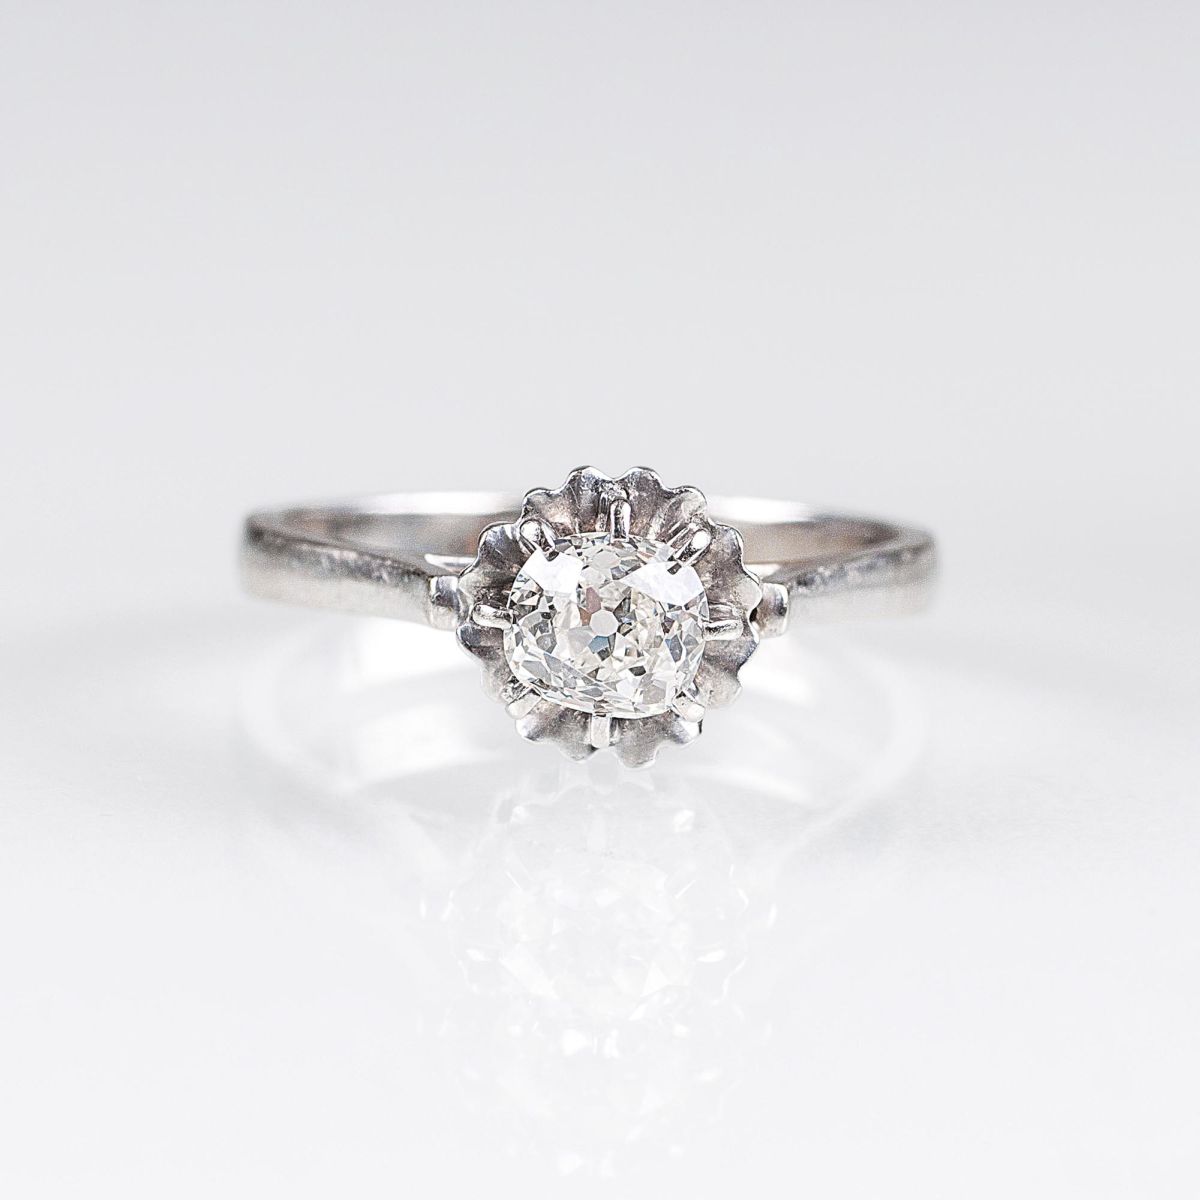 A Solitaire Ring with Old Cut Diamond